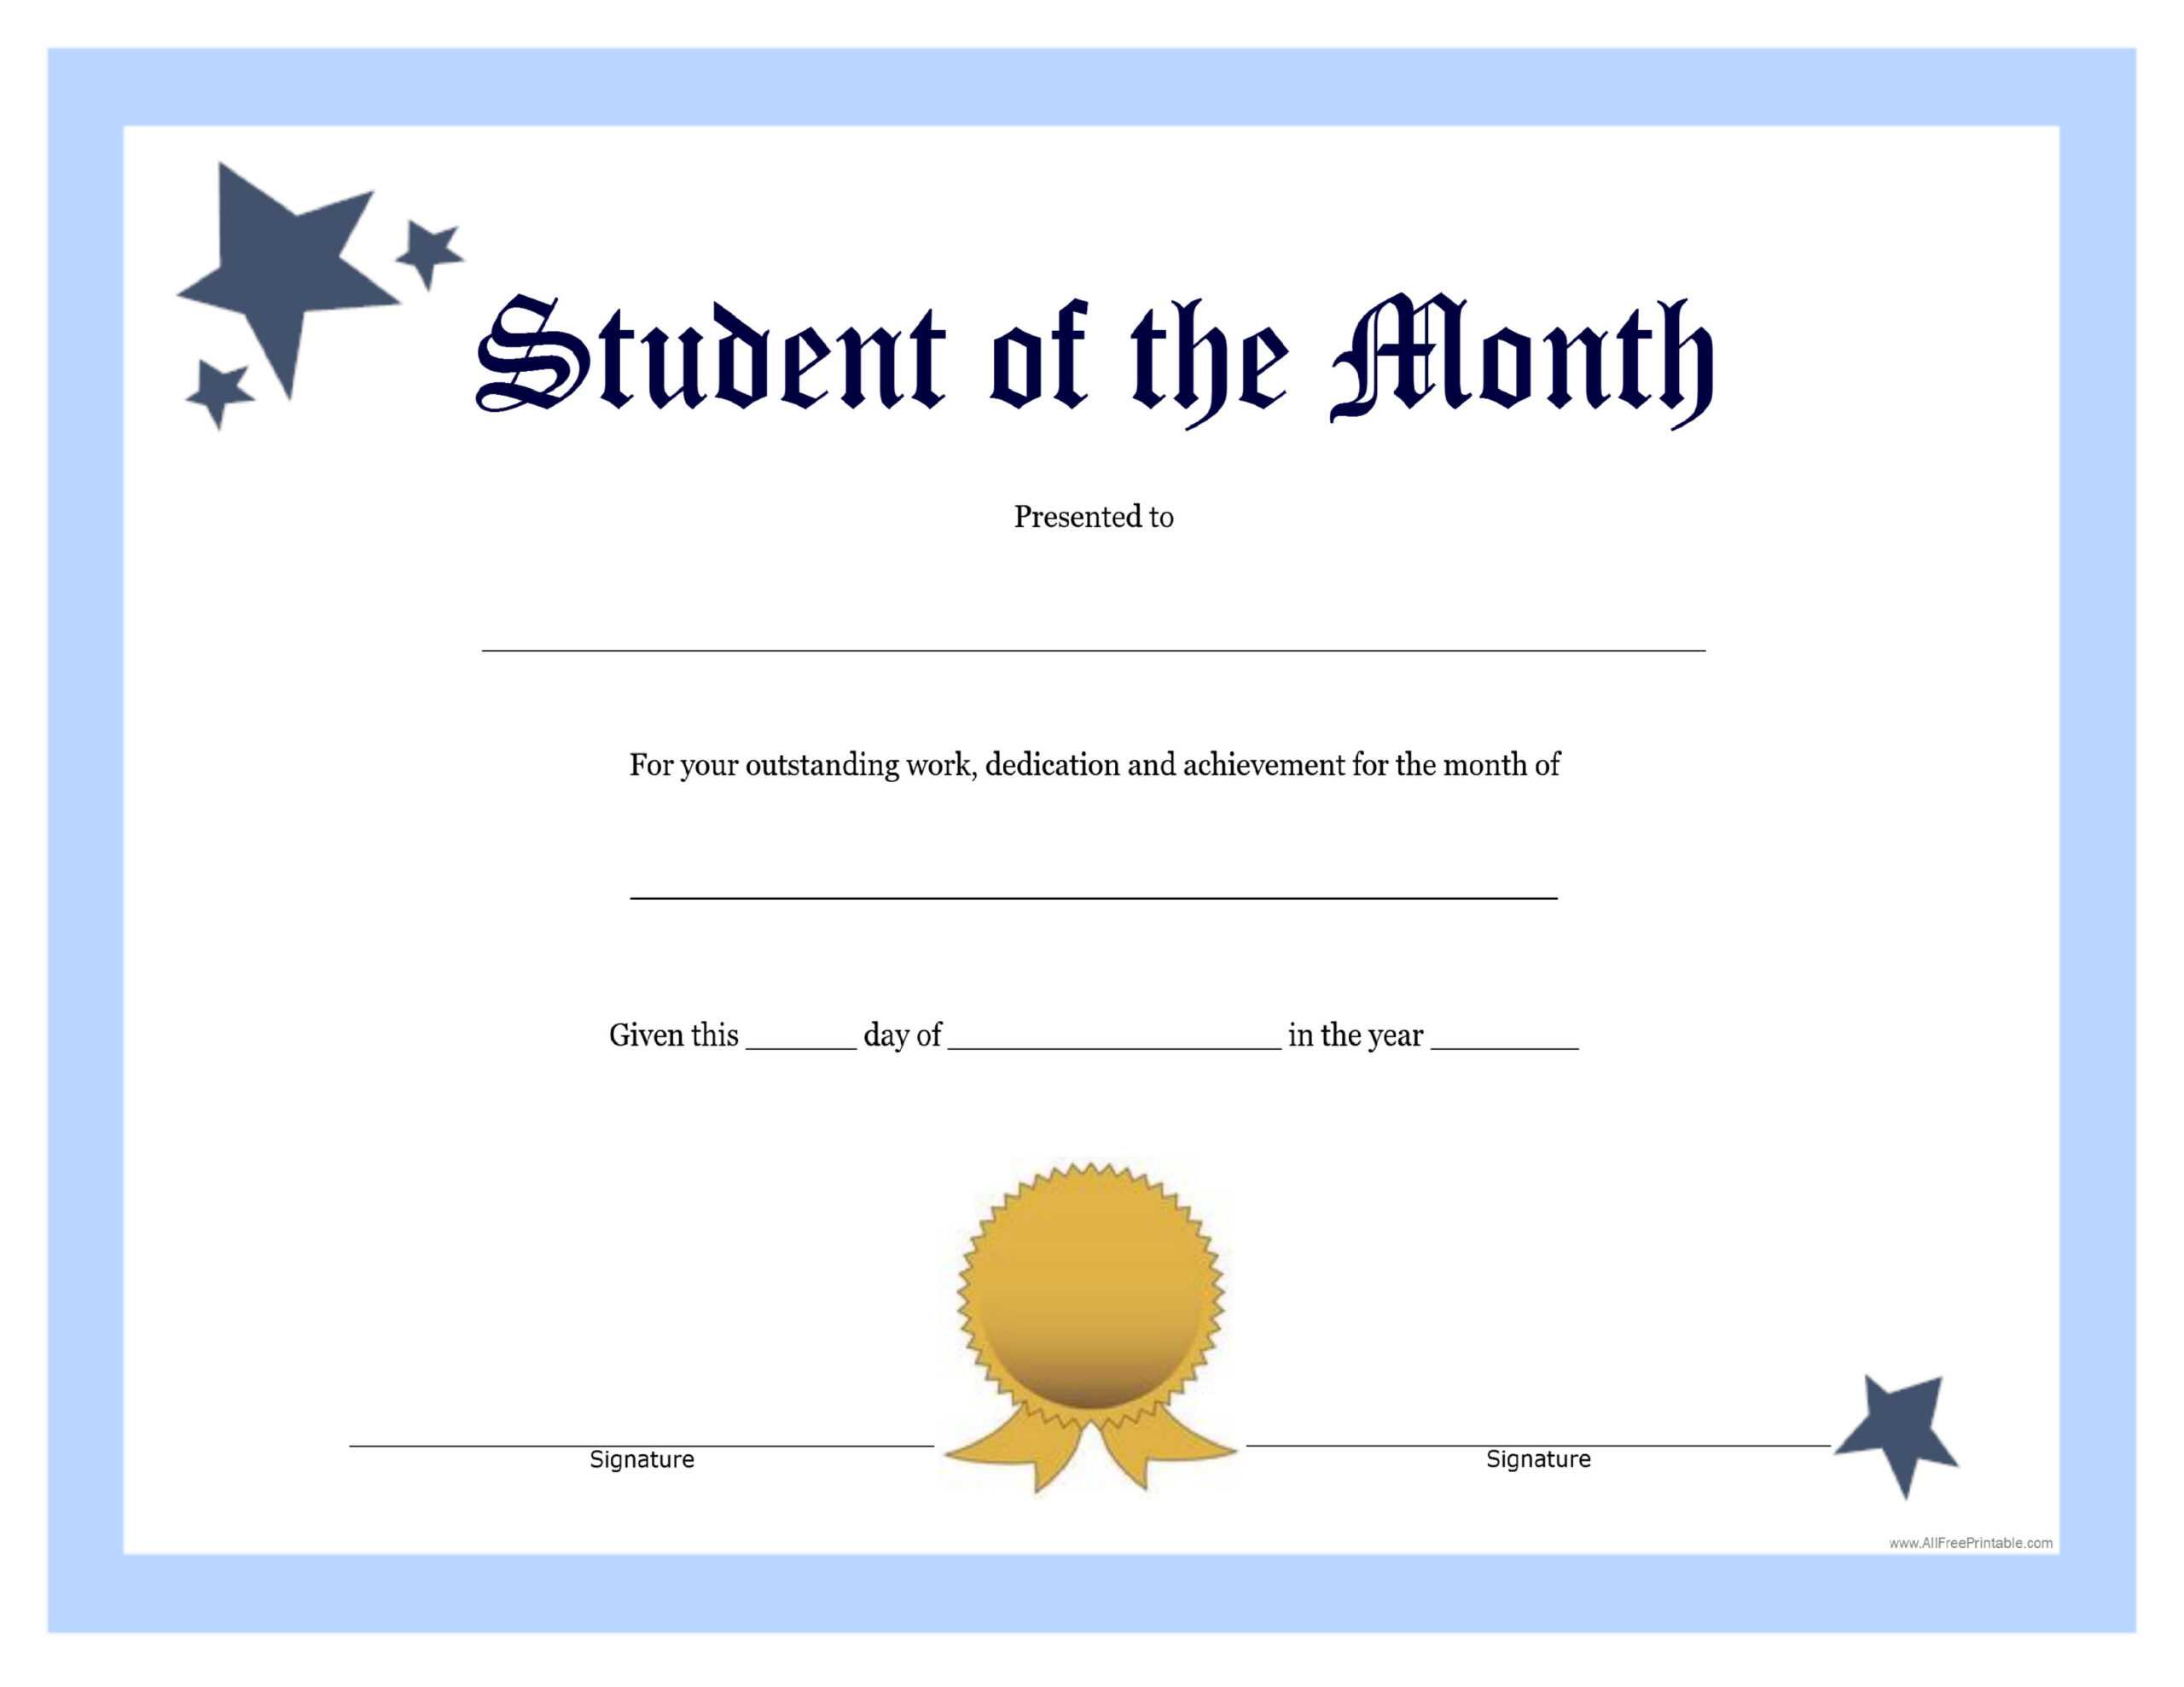 Student Of The Month Template | Asouthernbellein Regarding Free Printable Student Of The Month Certificate Templates